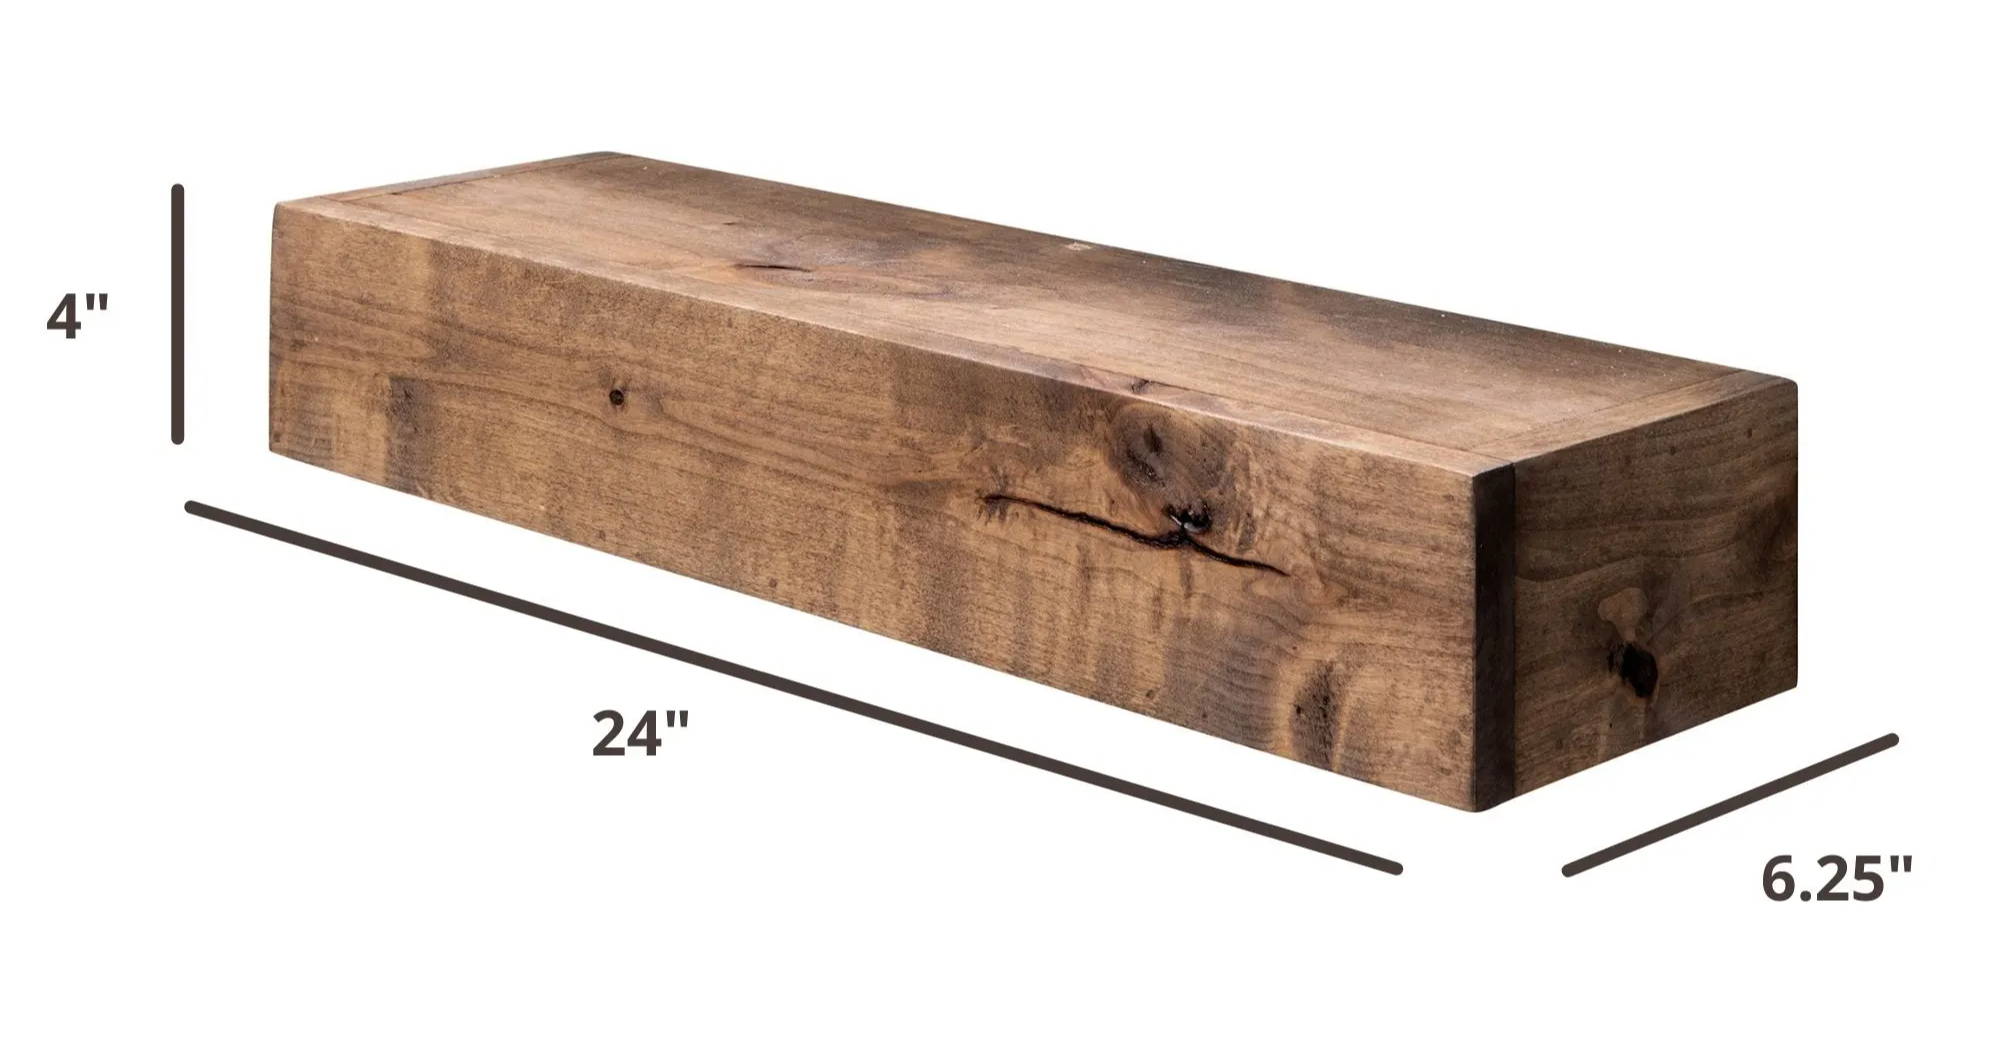 24 inches wide by 6.25 inches deep by 4 inches tall wall shelf